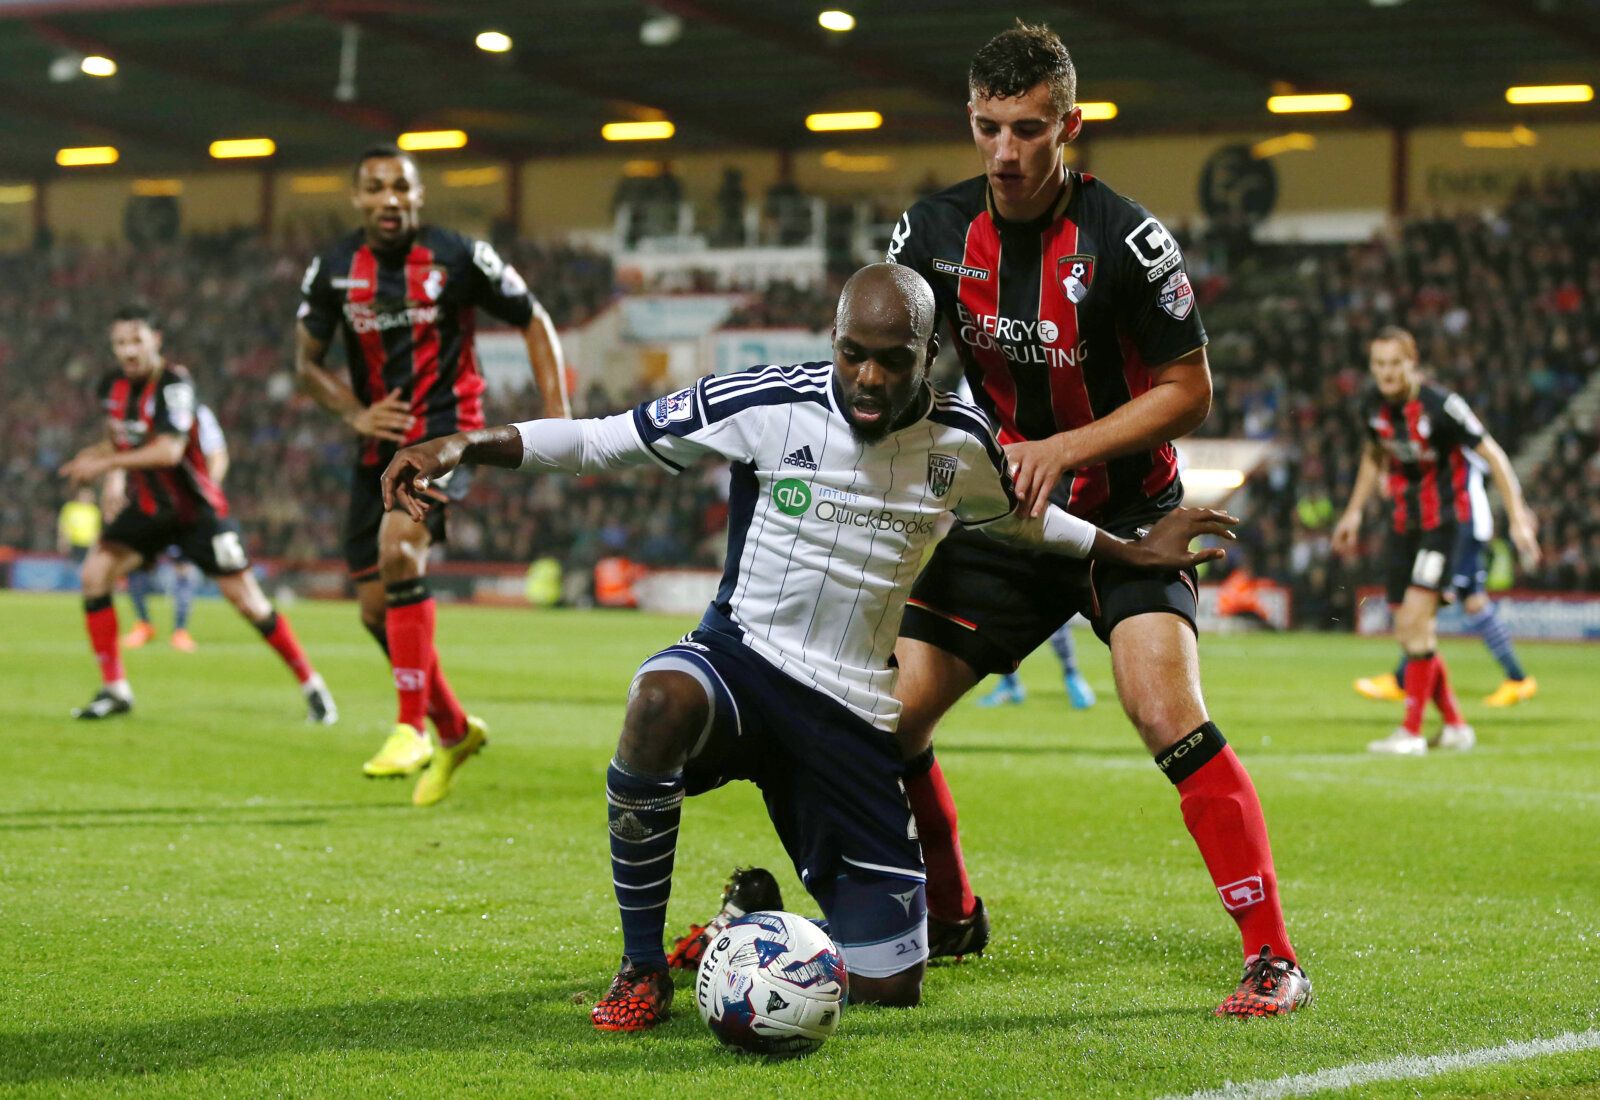 Football - AFC Bournemouth v West Bromwich Albion - Capital One Cup Fourth Round - Goldsands Stadium, Dean Court - 28/10/14 
Bournemouth's Baily Cargill in action against West Brom's Youssouf Mulumbu (L) 
Mandatory Credit: Action Images / Peter Cziborra 
Livepic 
EDITORIAL USE ONLY. No use with unauthorized audio, video, data, fixture lists, club/league logos or 